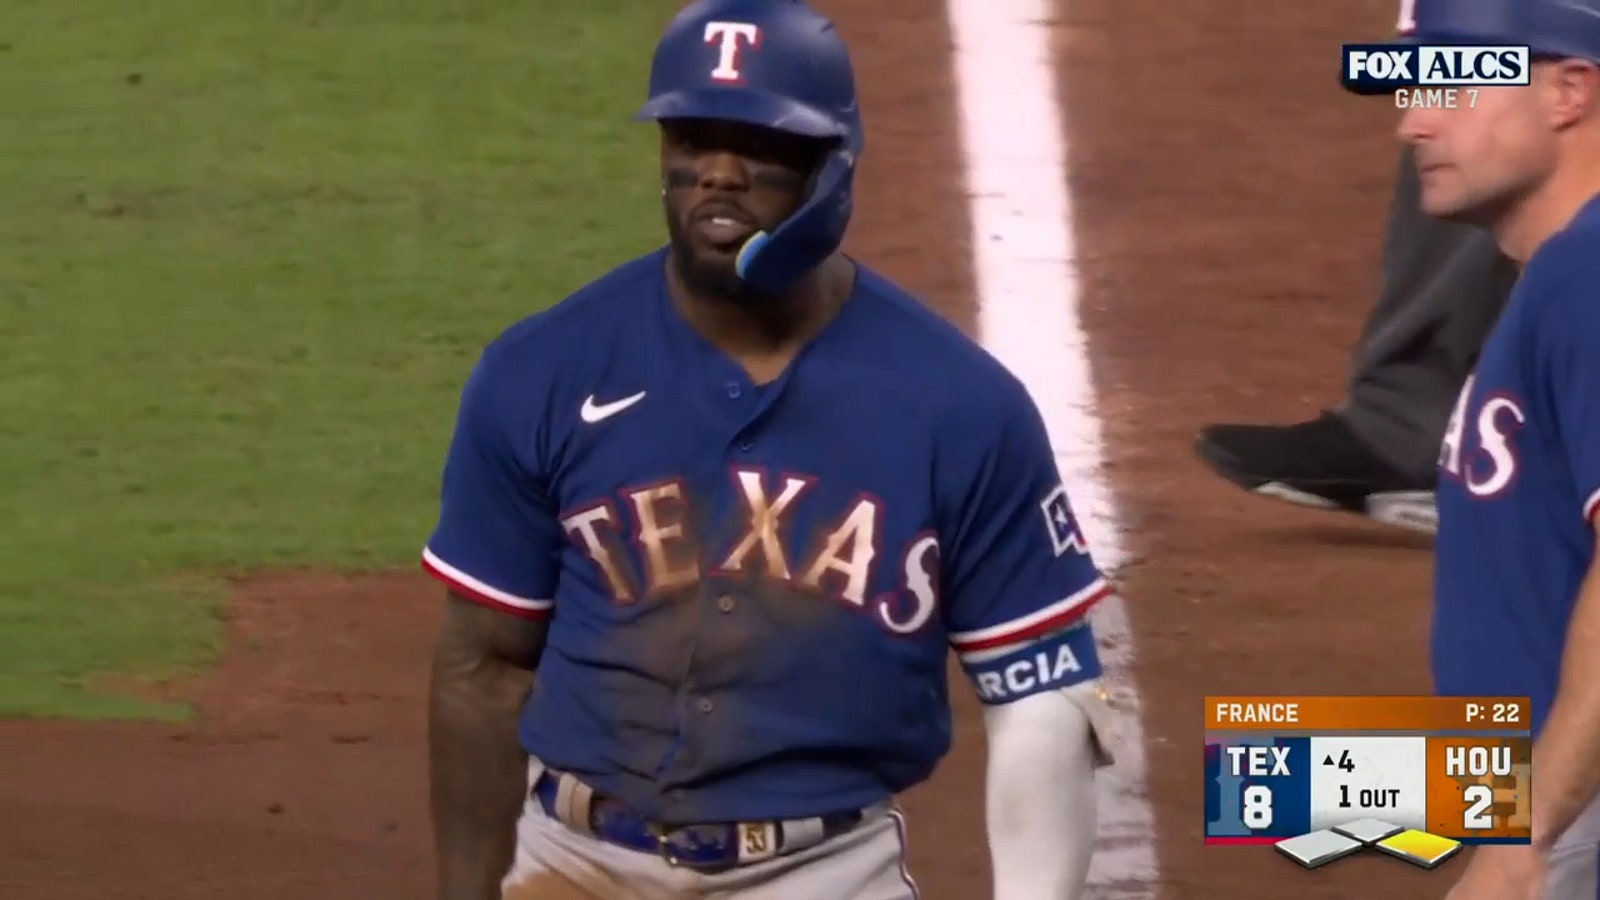 Evan Carter and Adolis Garcia both hit two-run singles to extend the Rangers' lead over the Astros.